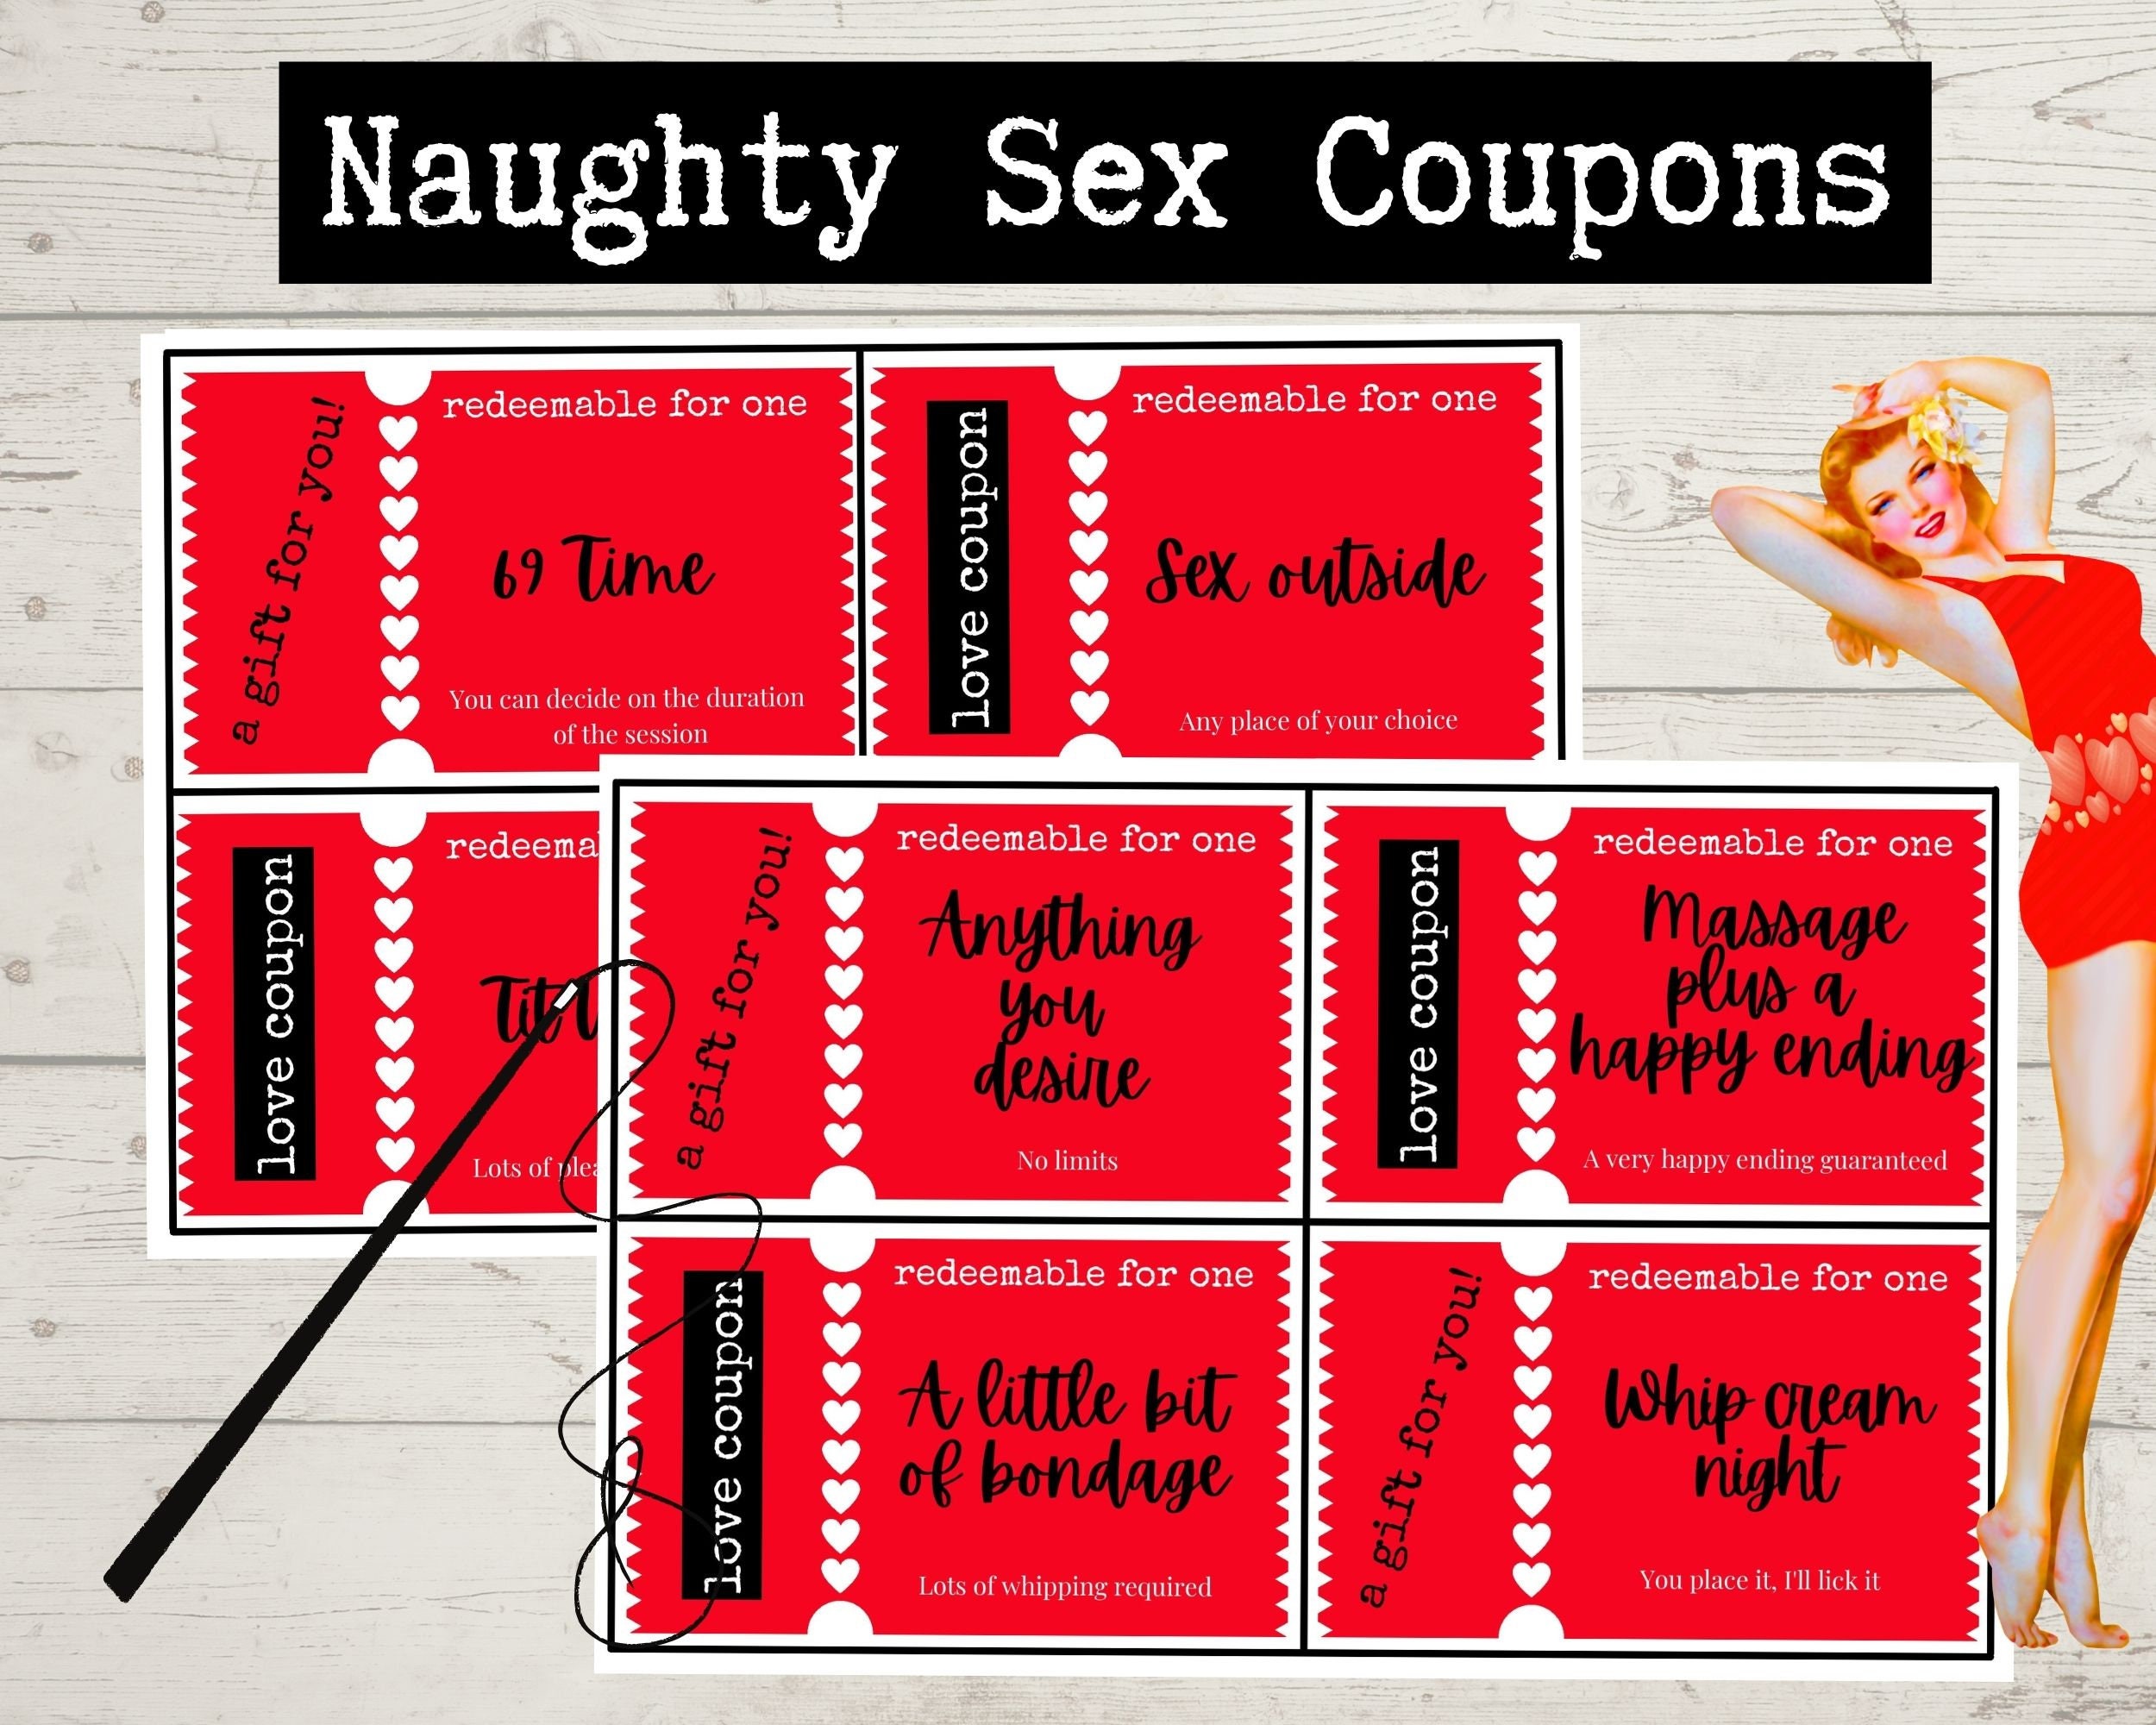 Naughty Sex Coupons Sexy Coupons Naughty Coupon Book hq image